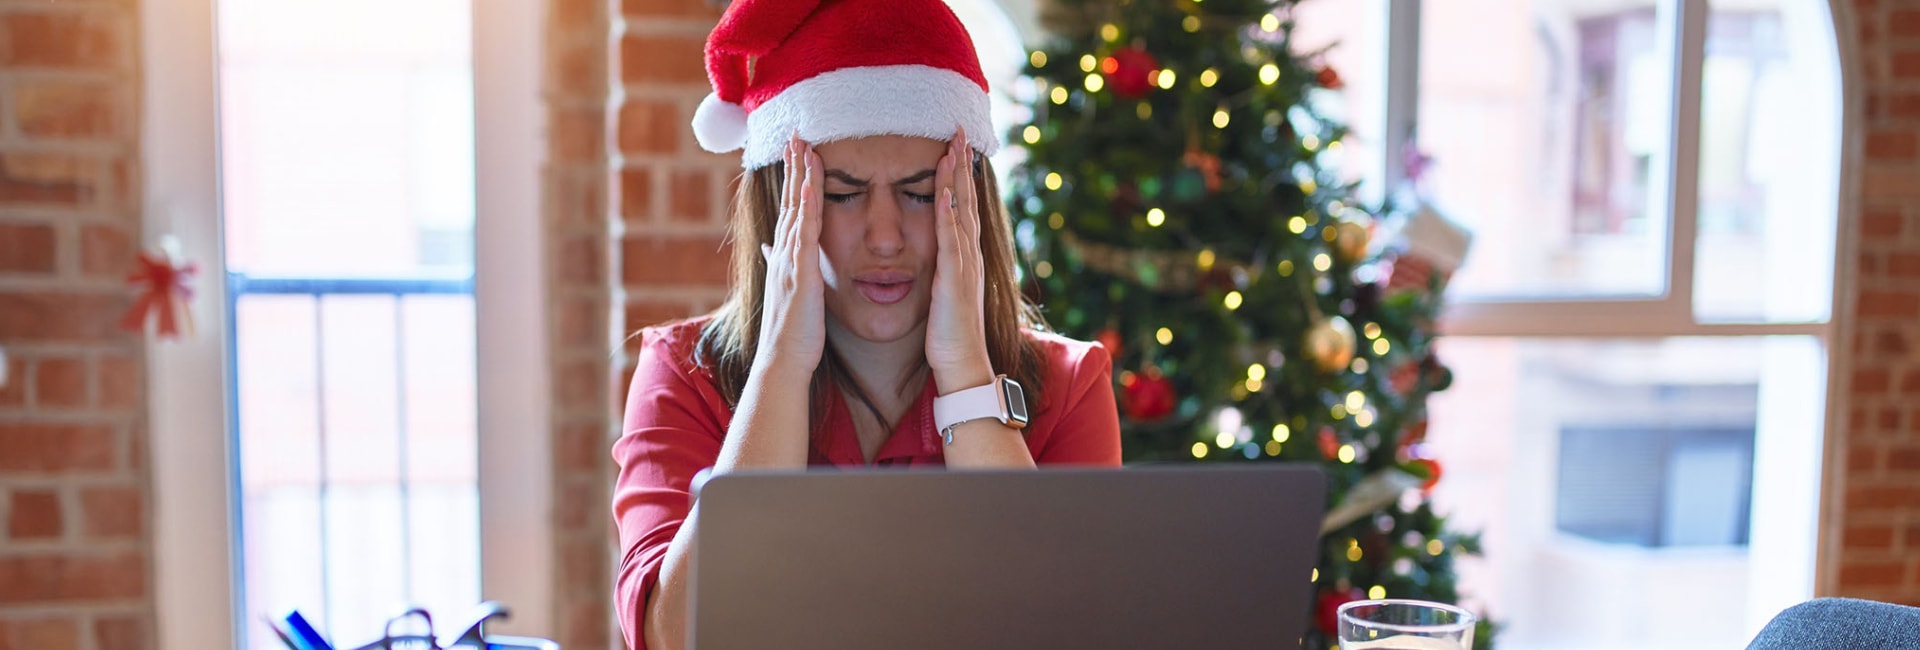 woman holds her head in response to a stress headache at the holidays